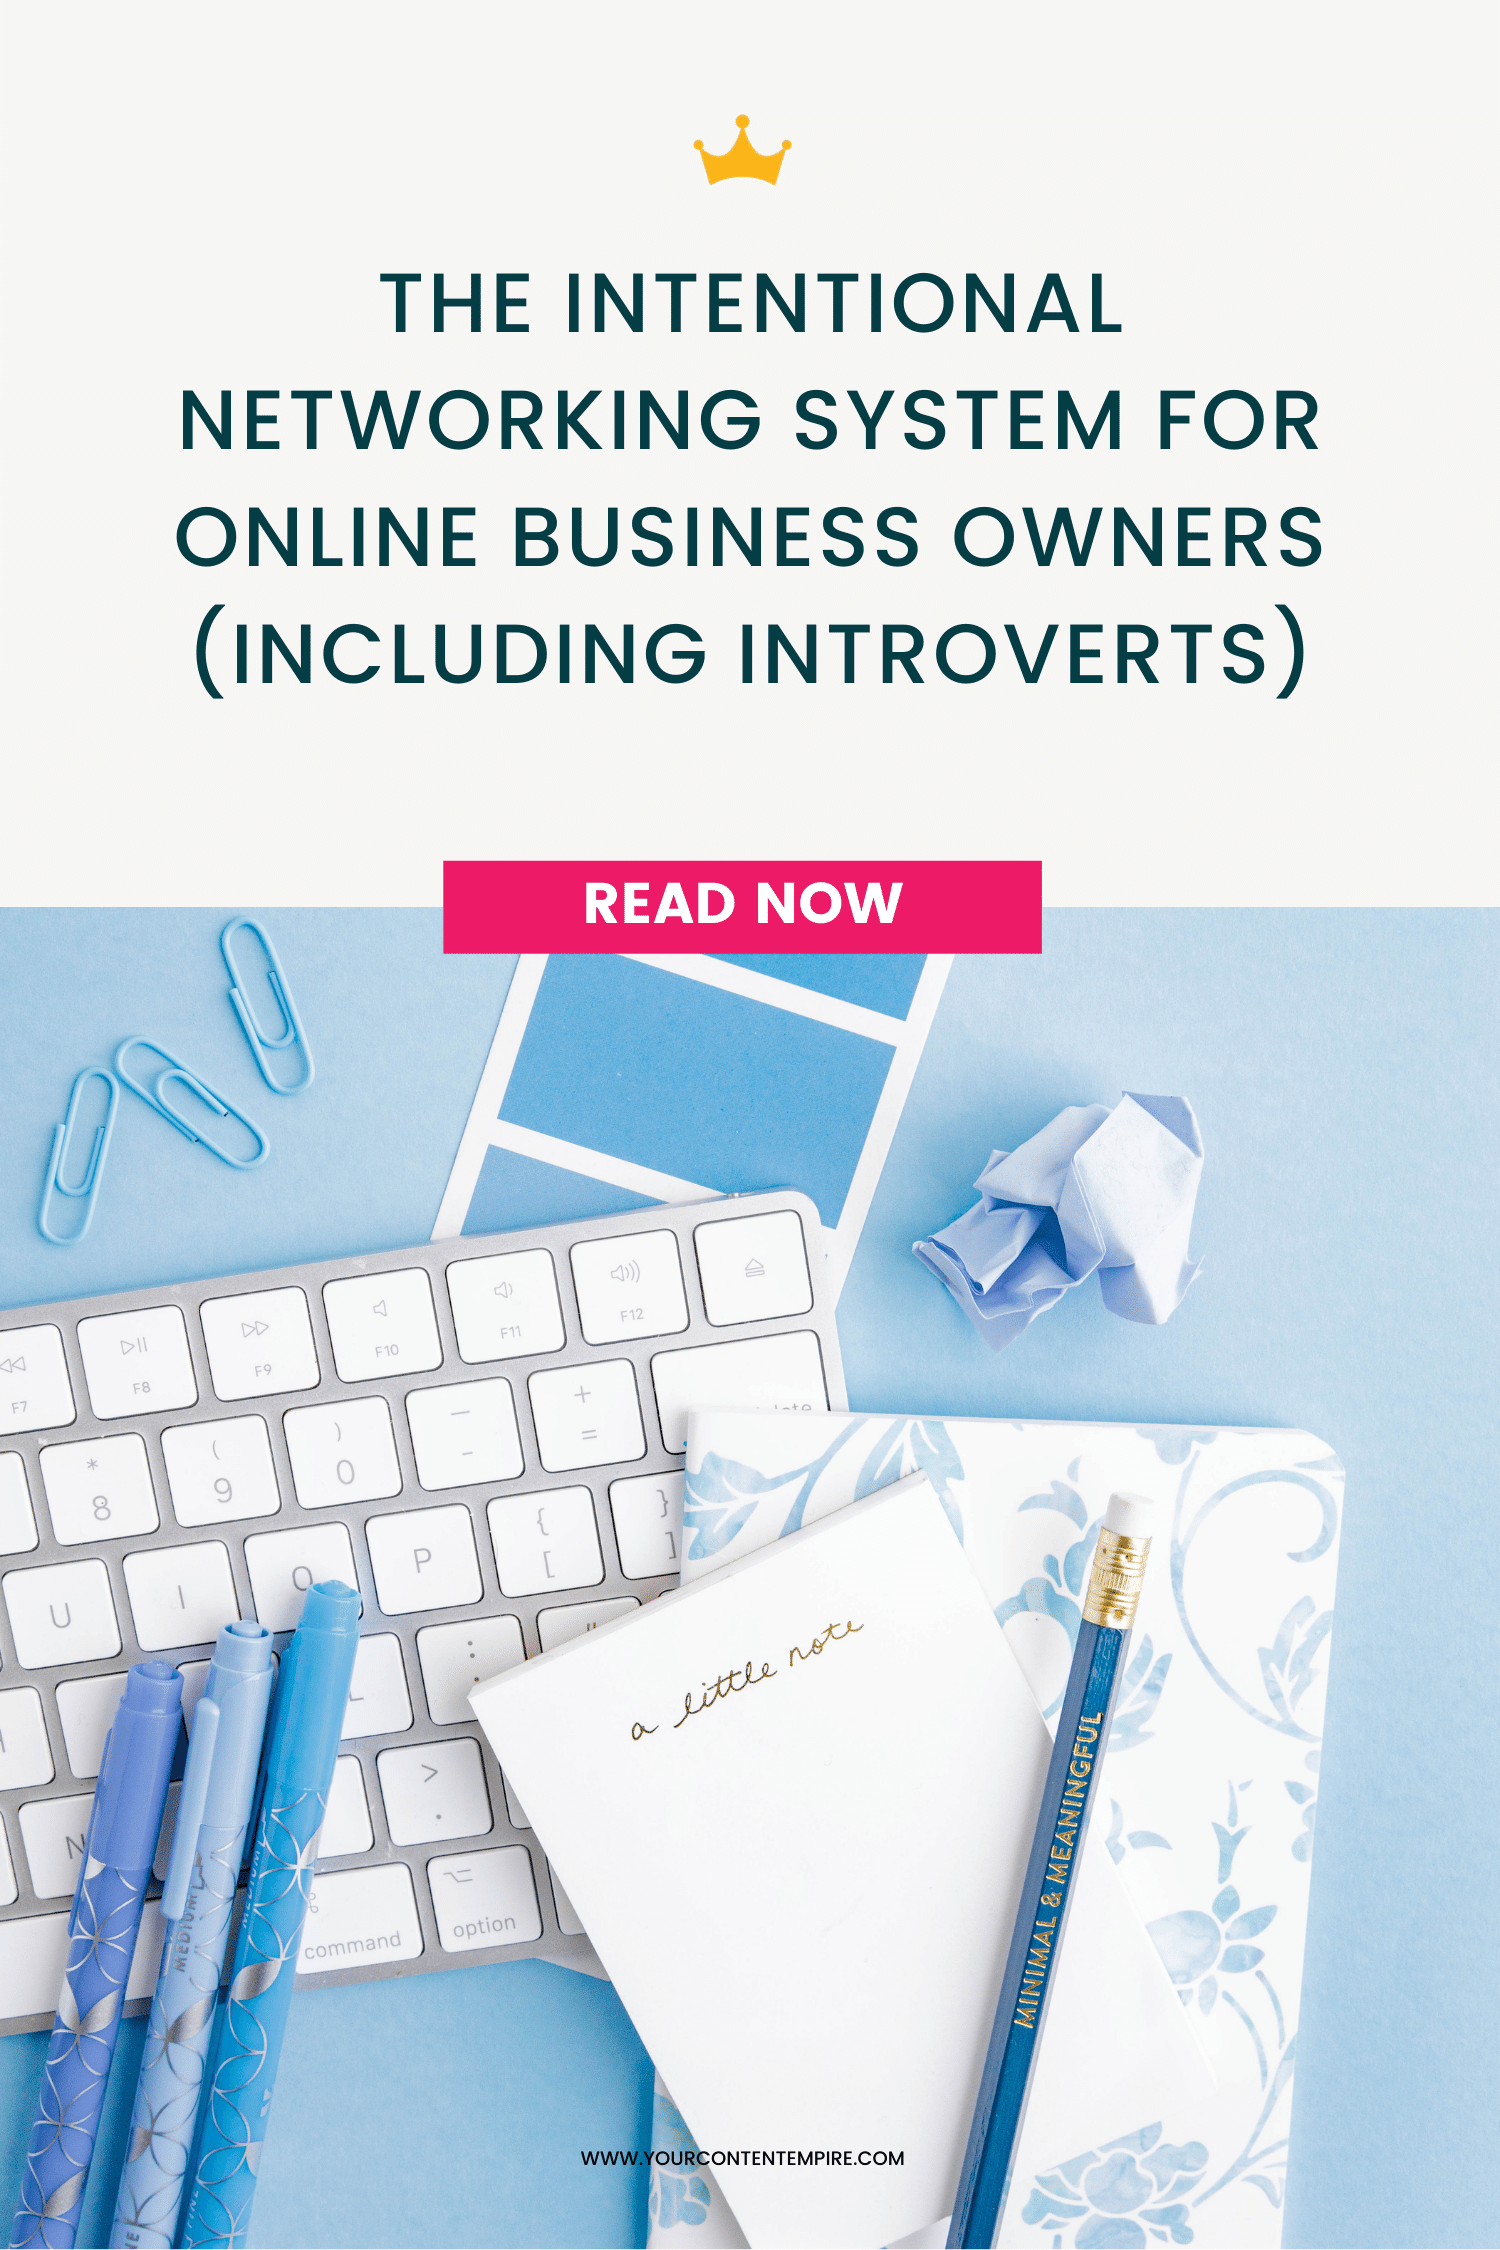 The Intentional Networking System For Online Business Owners (Including Introverts)